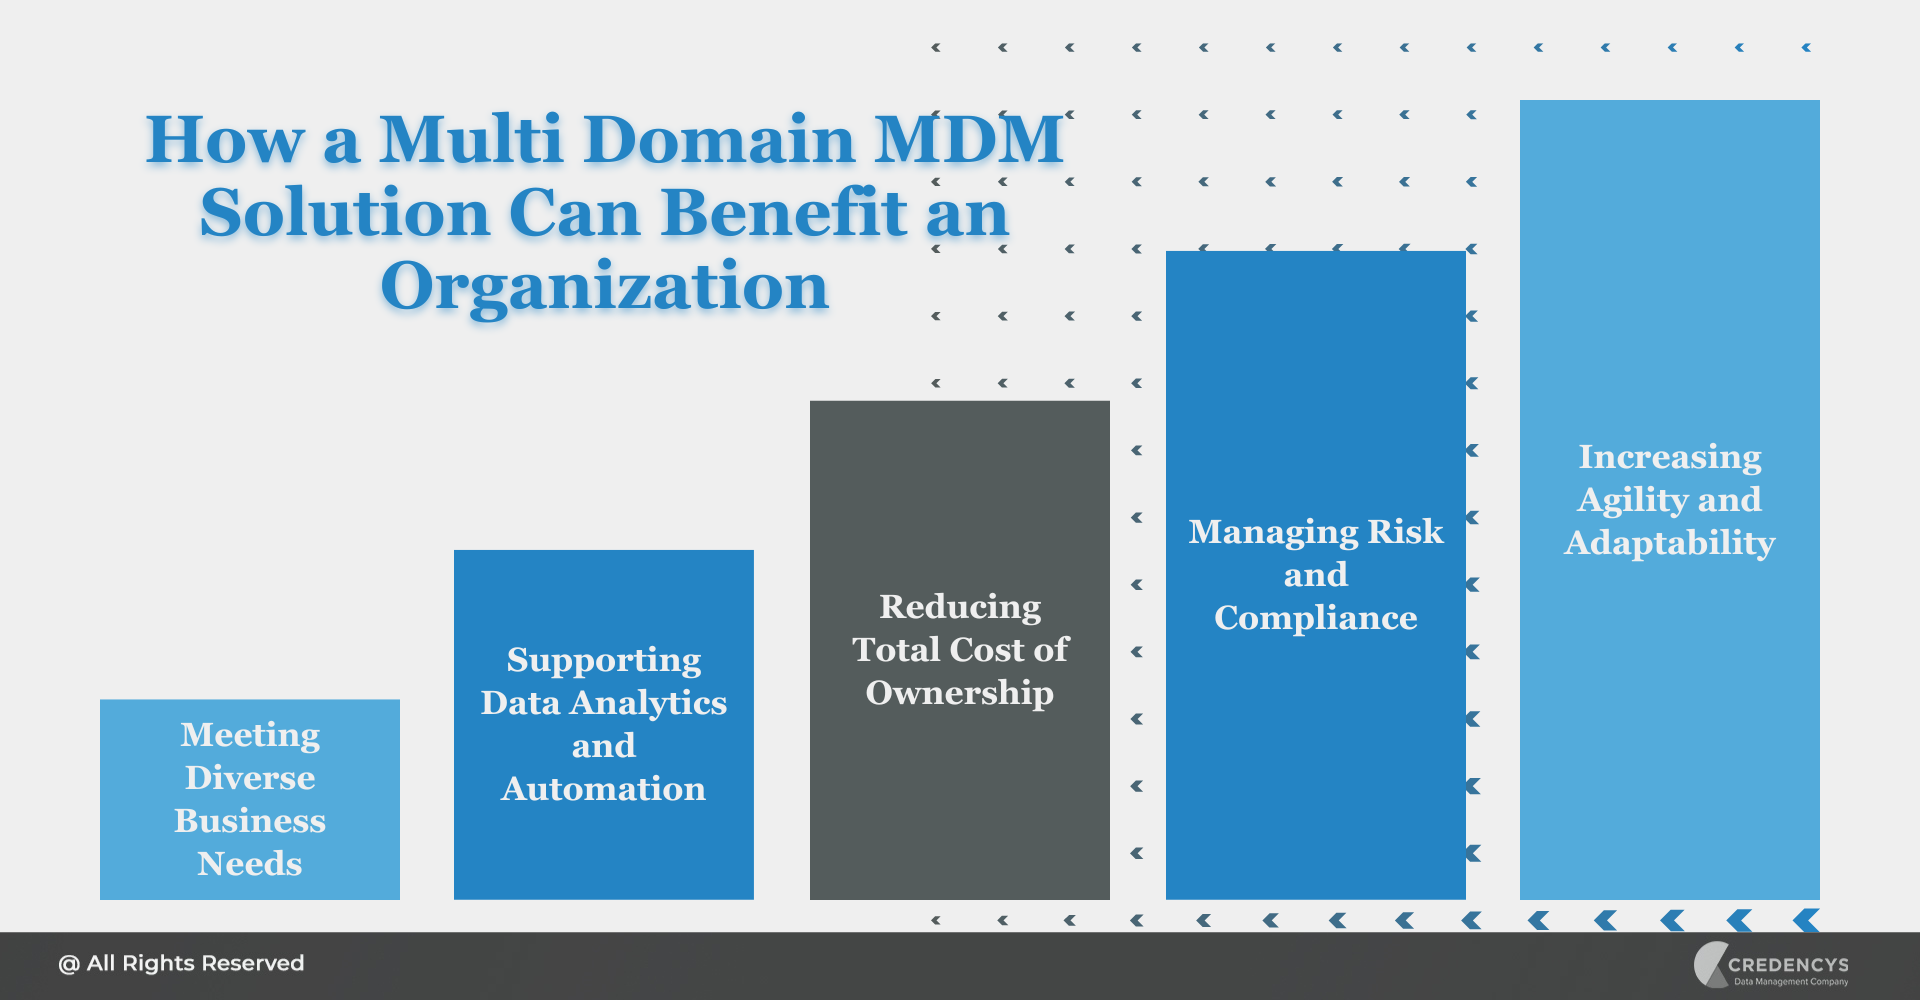 How a Multi Domain MDM Solution Can Benefit an Organization